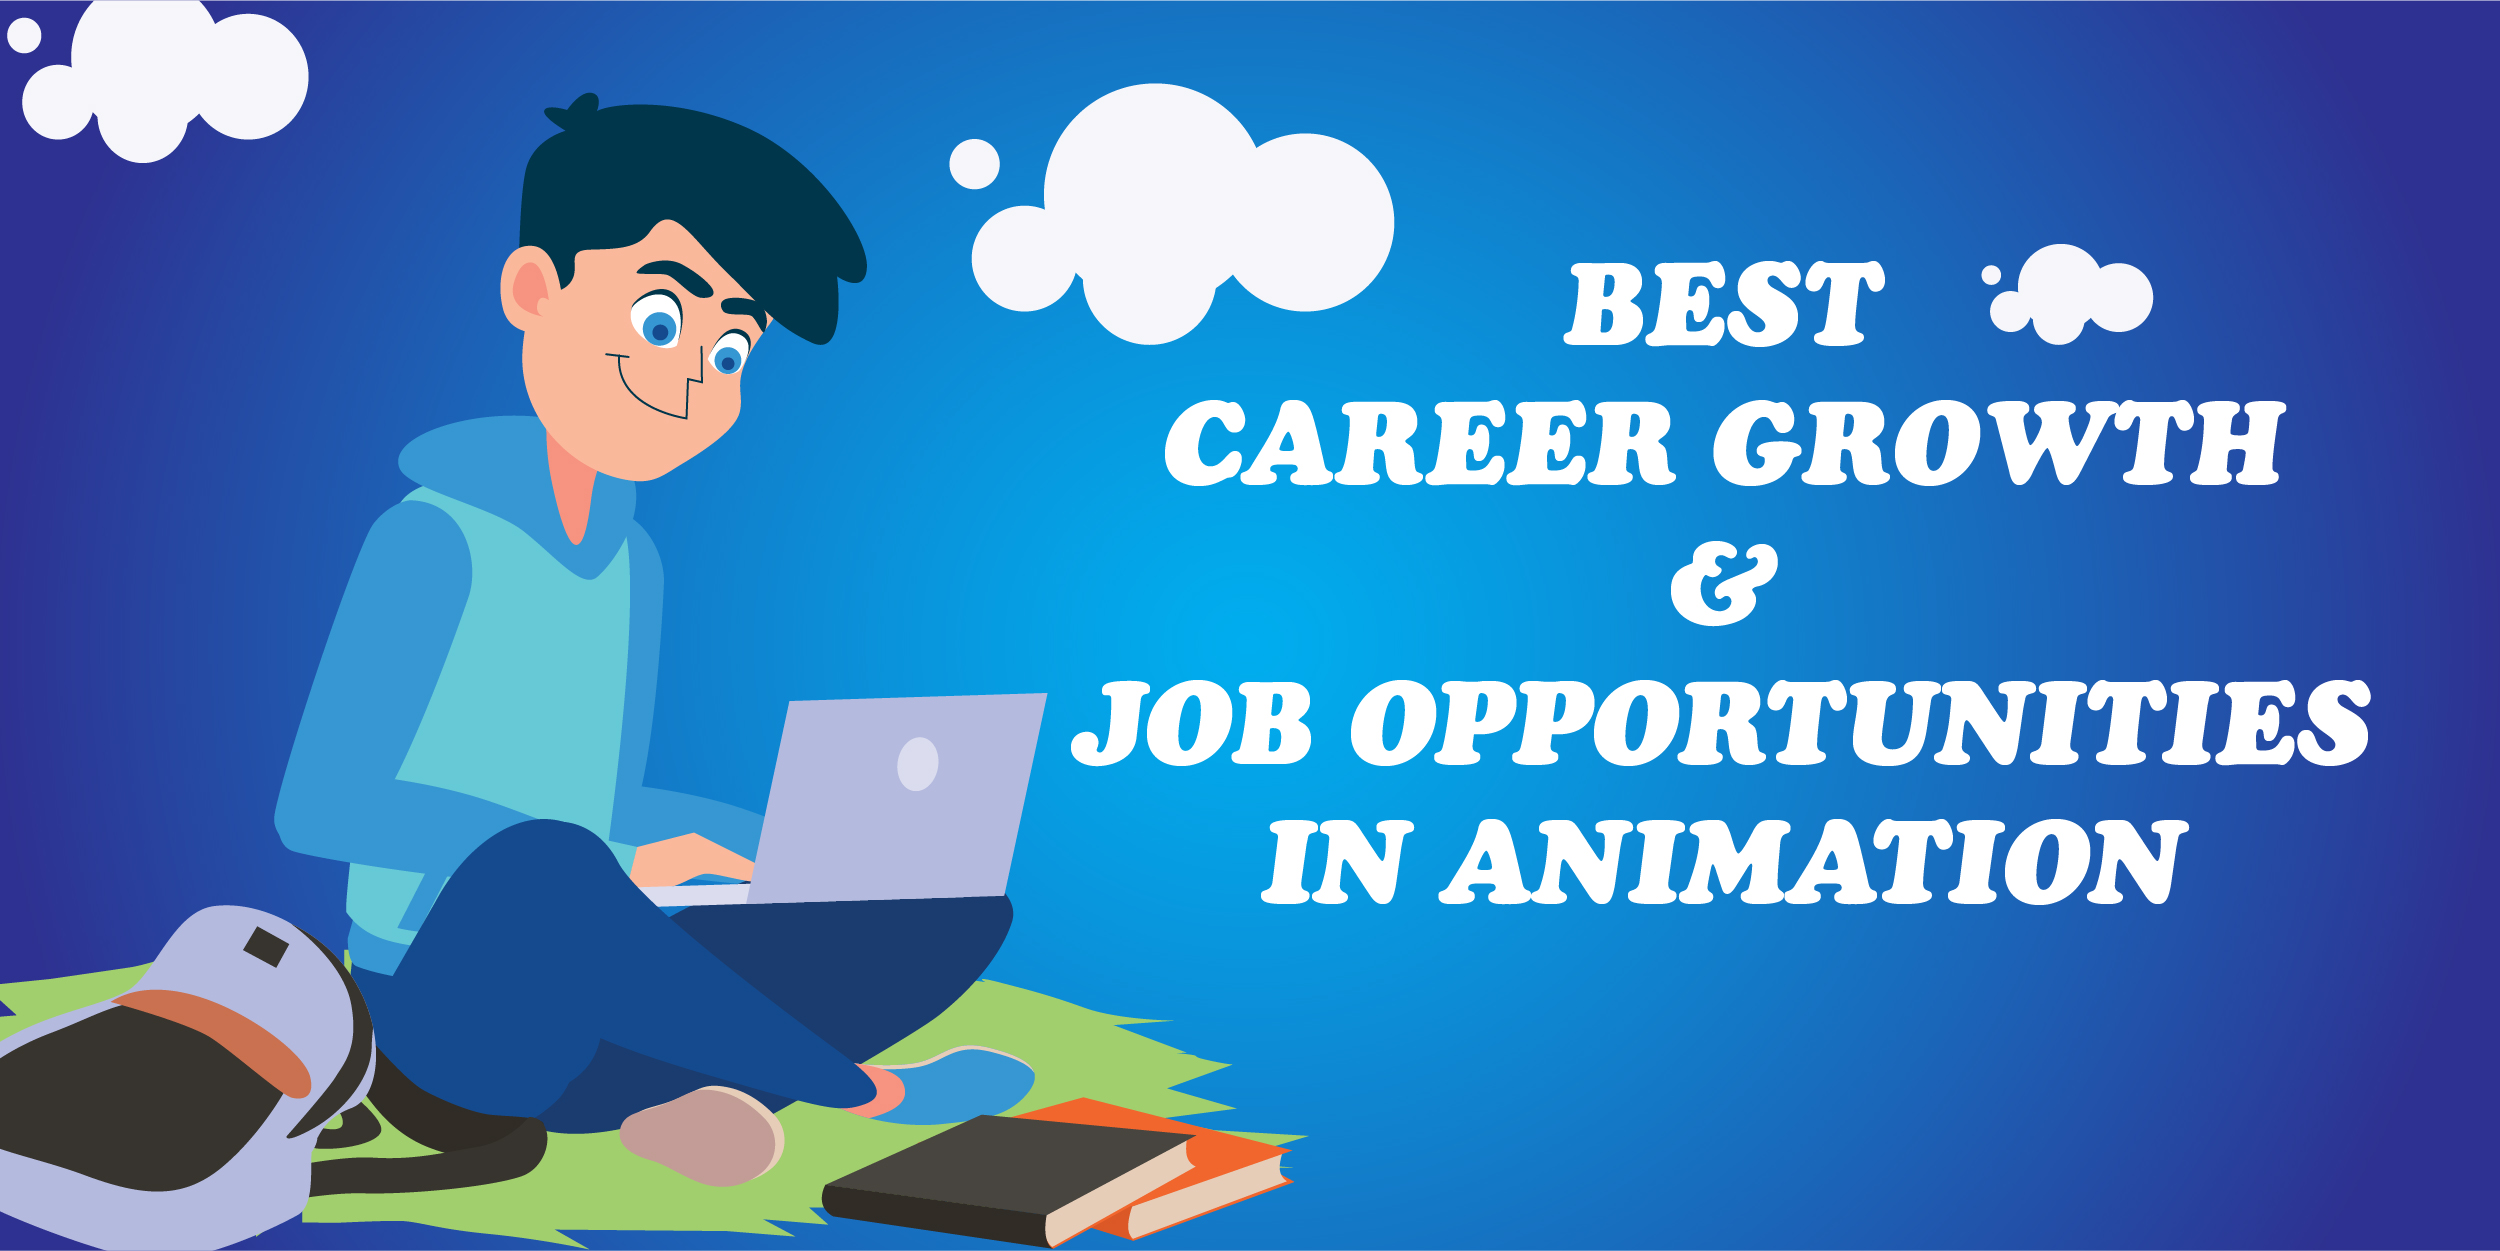 Job opportunities for animation